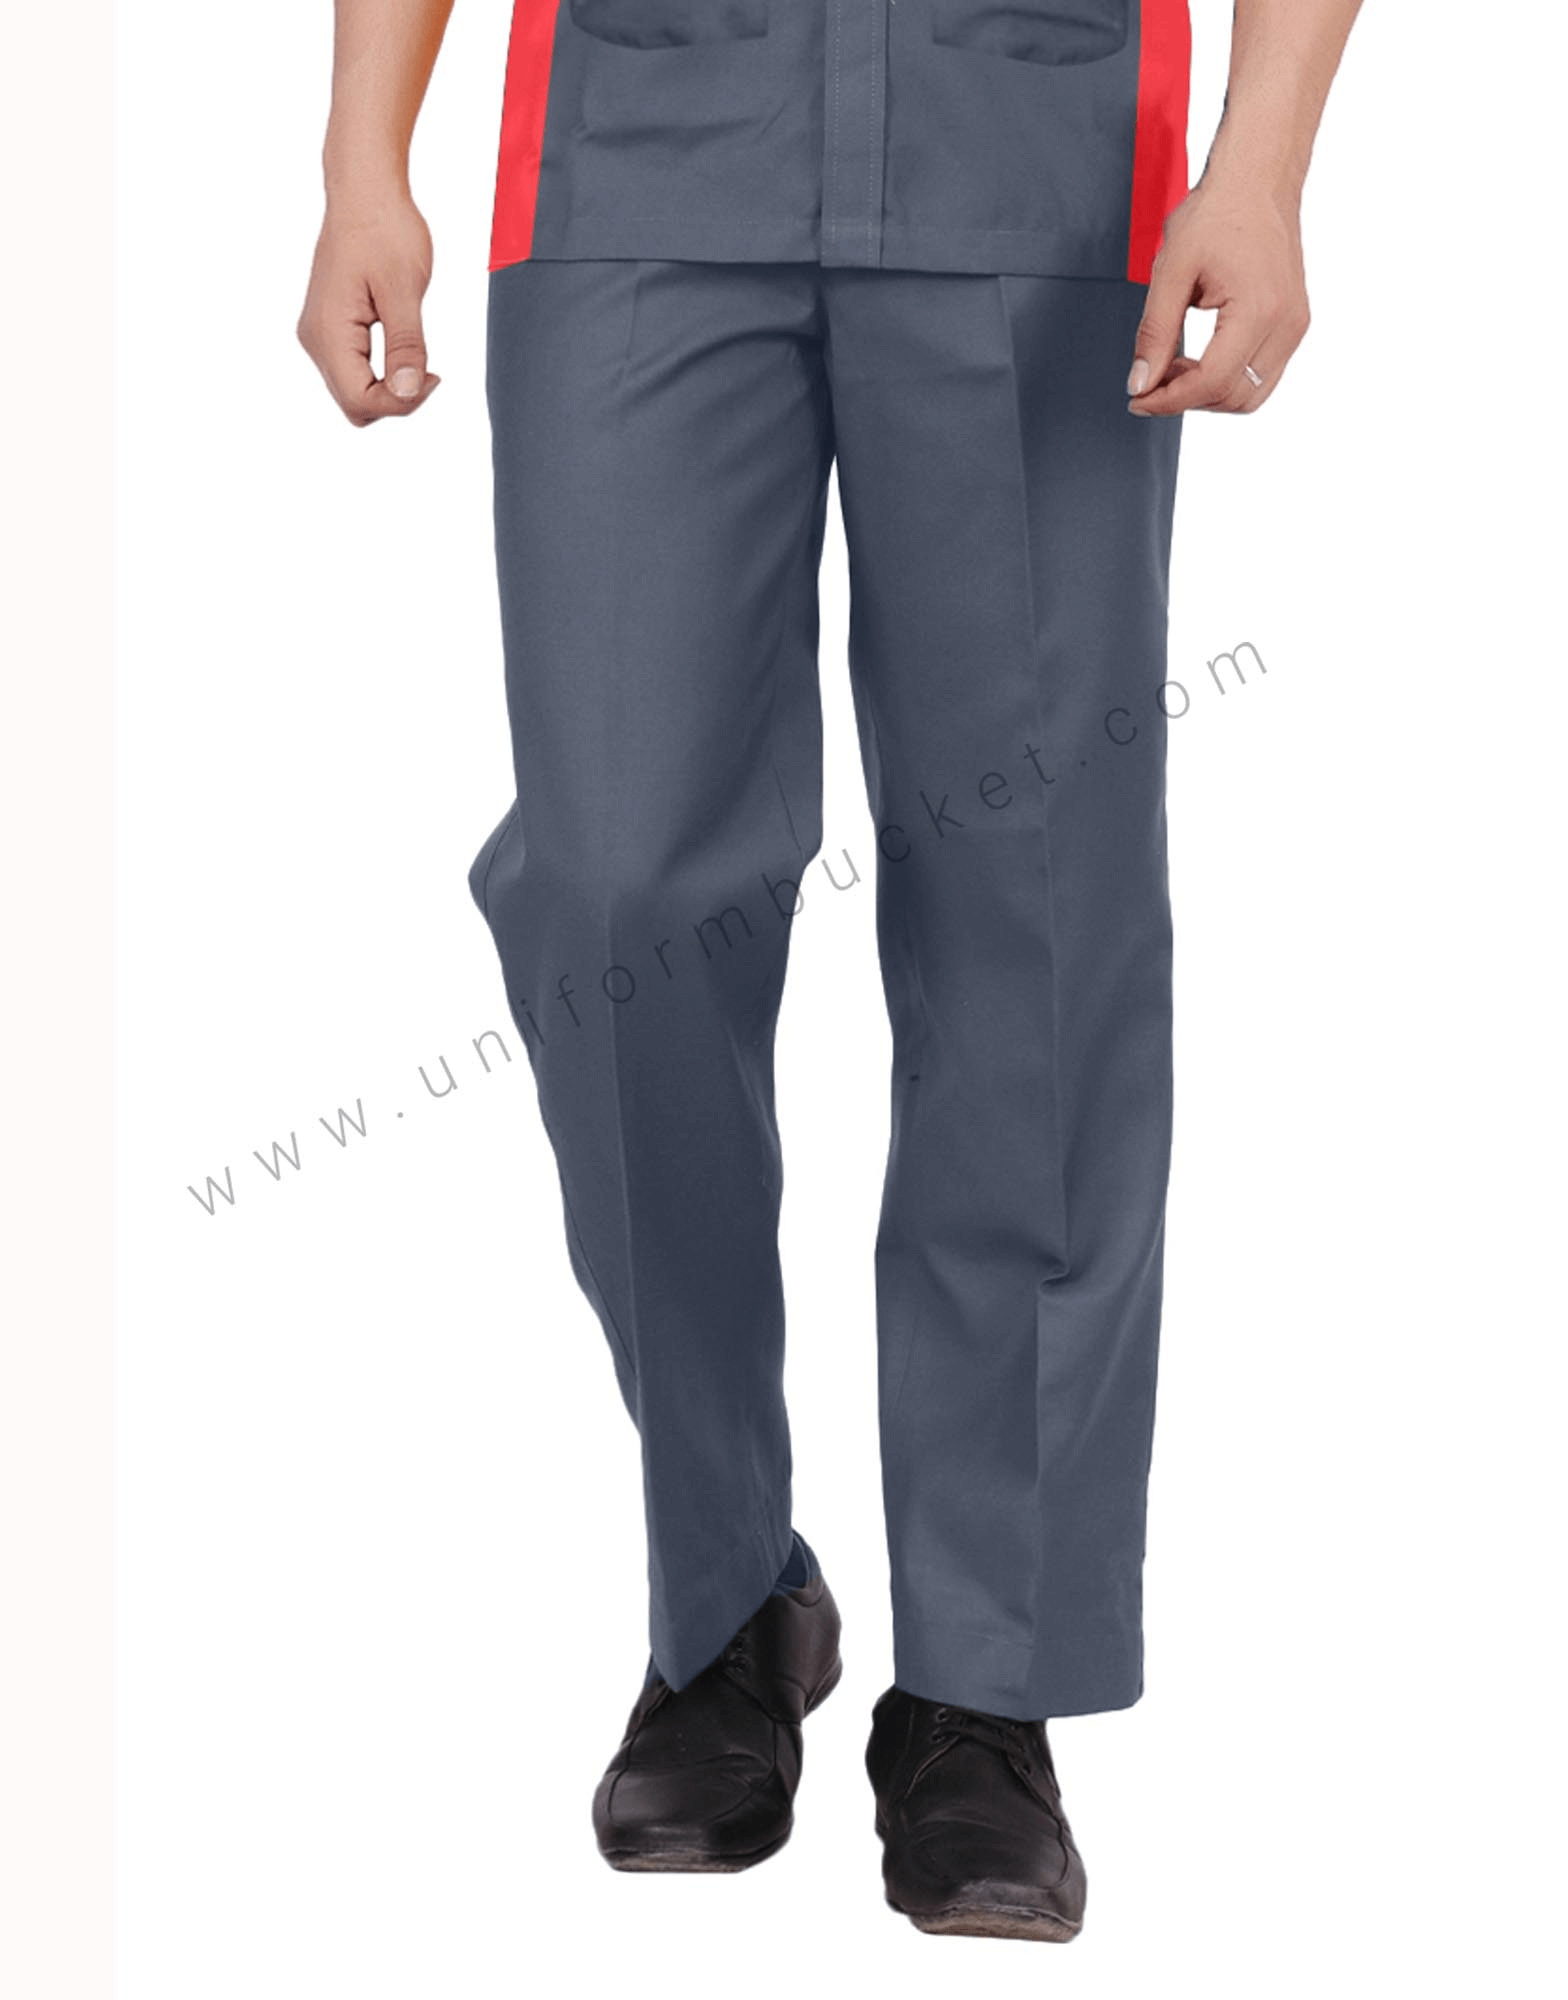 Flu Cotton Slim Fit Casual Wear Plain Trousers for Men | Udaan - B2B Buying  for Retailers